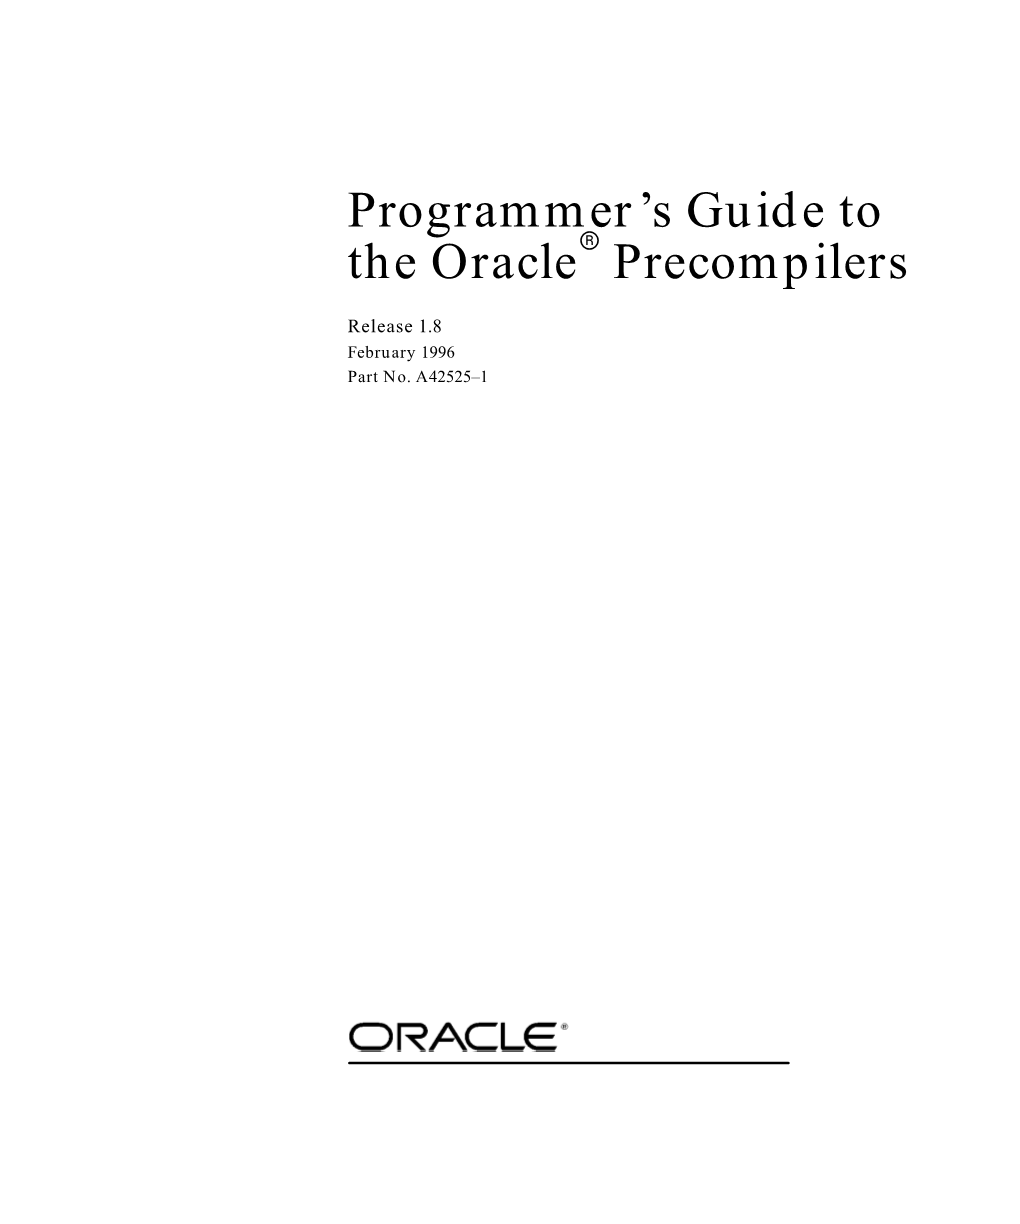 Programmer's Guide to the Oracle Precompilers